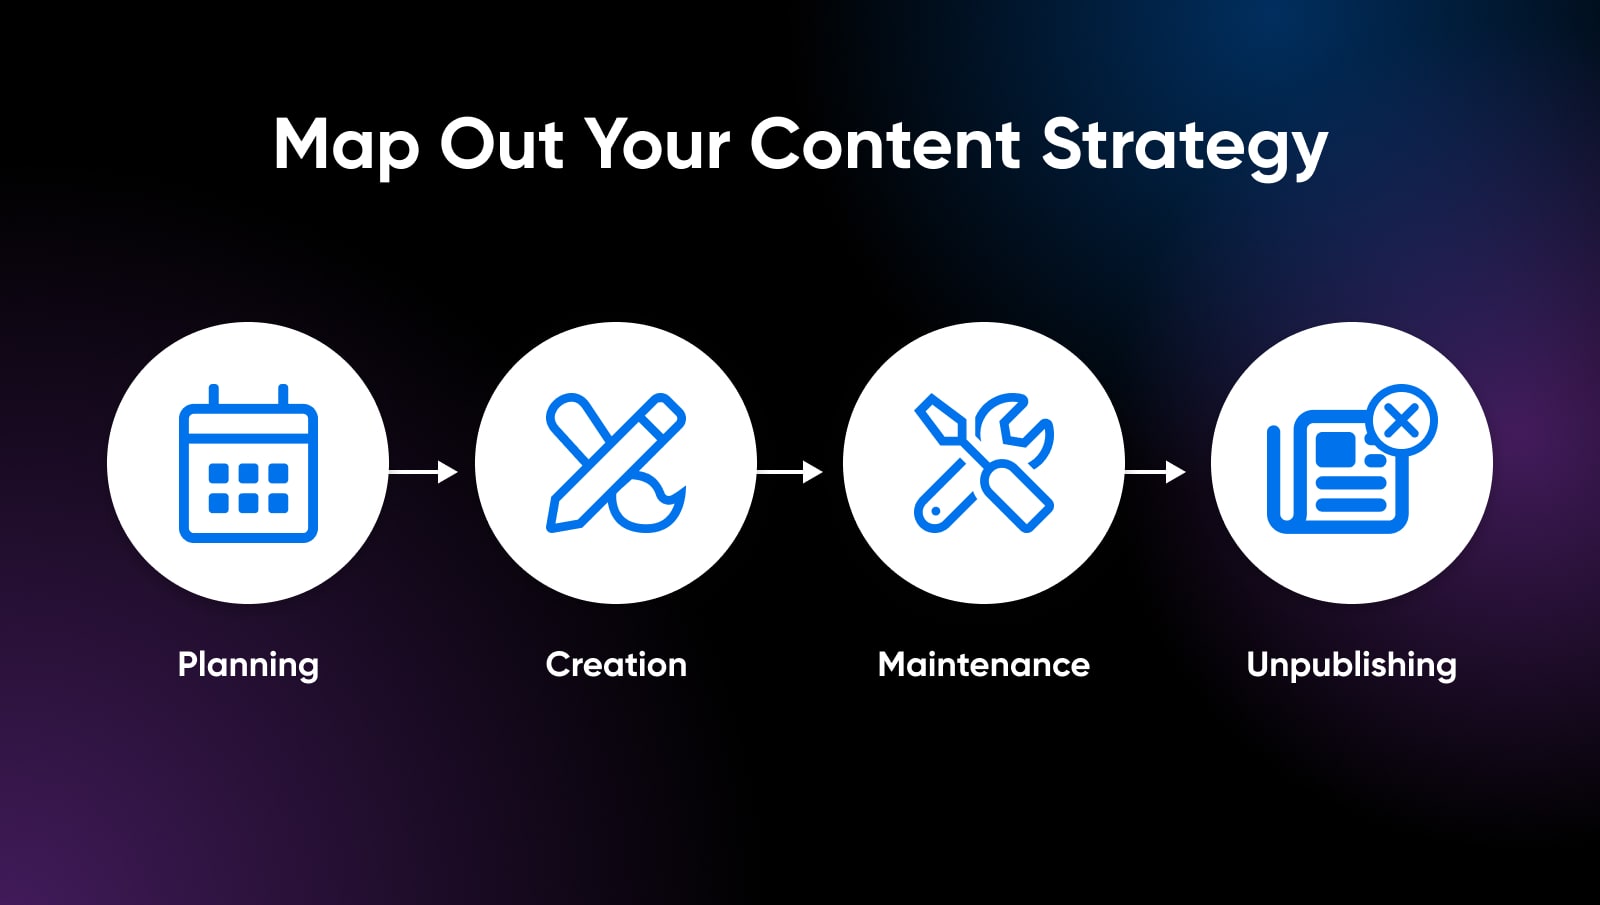 four step content strategy: planning, creation, maintenance, unpublishing